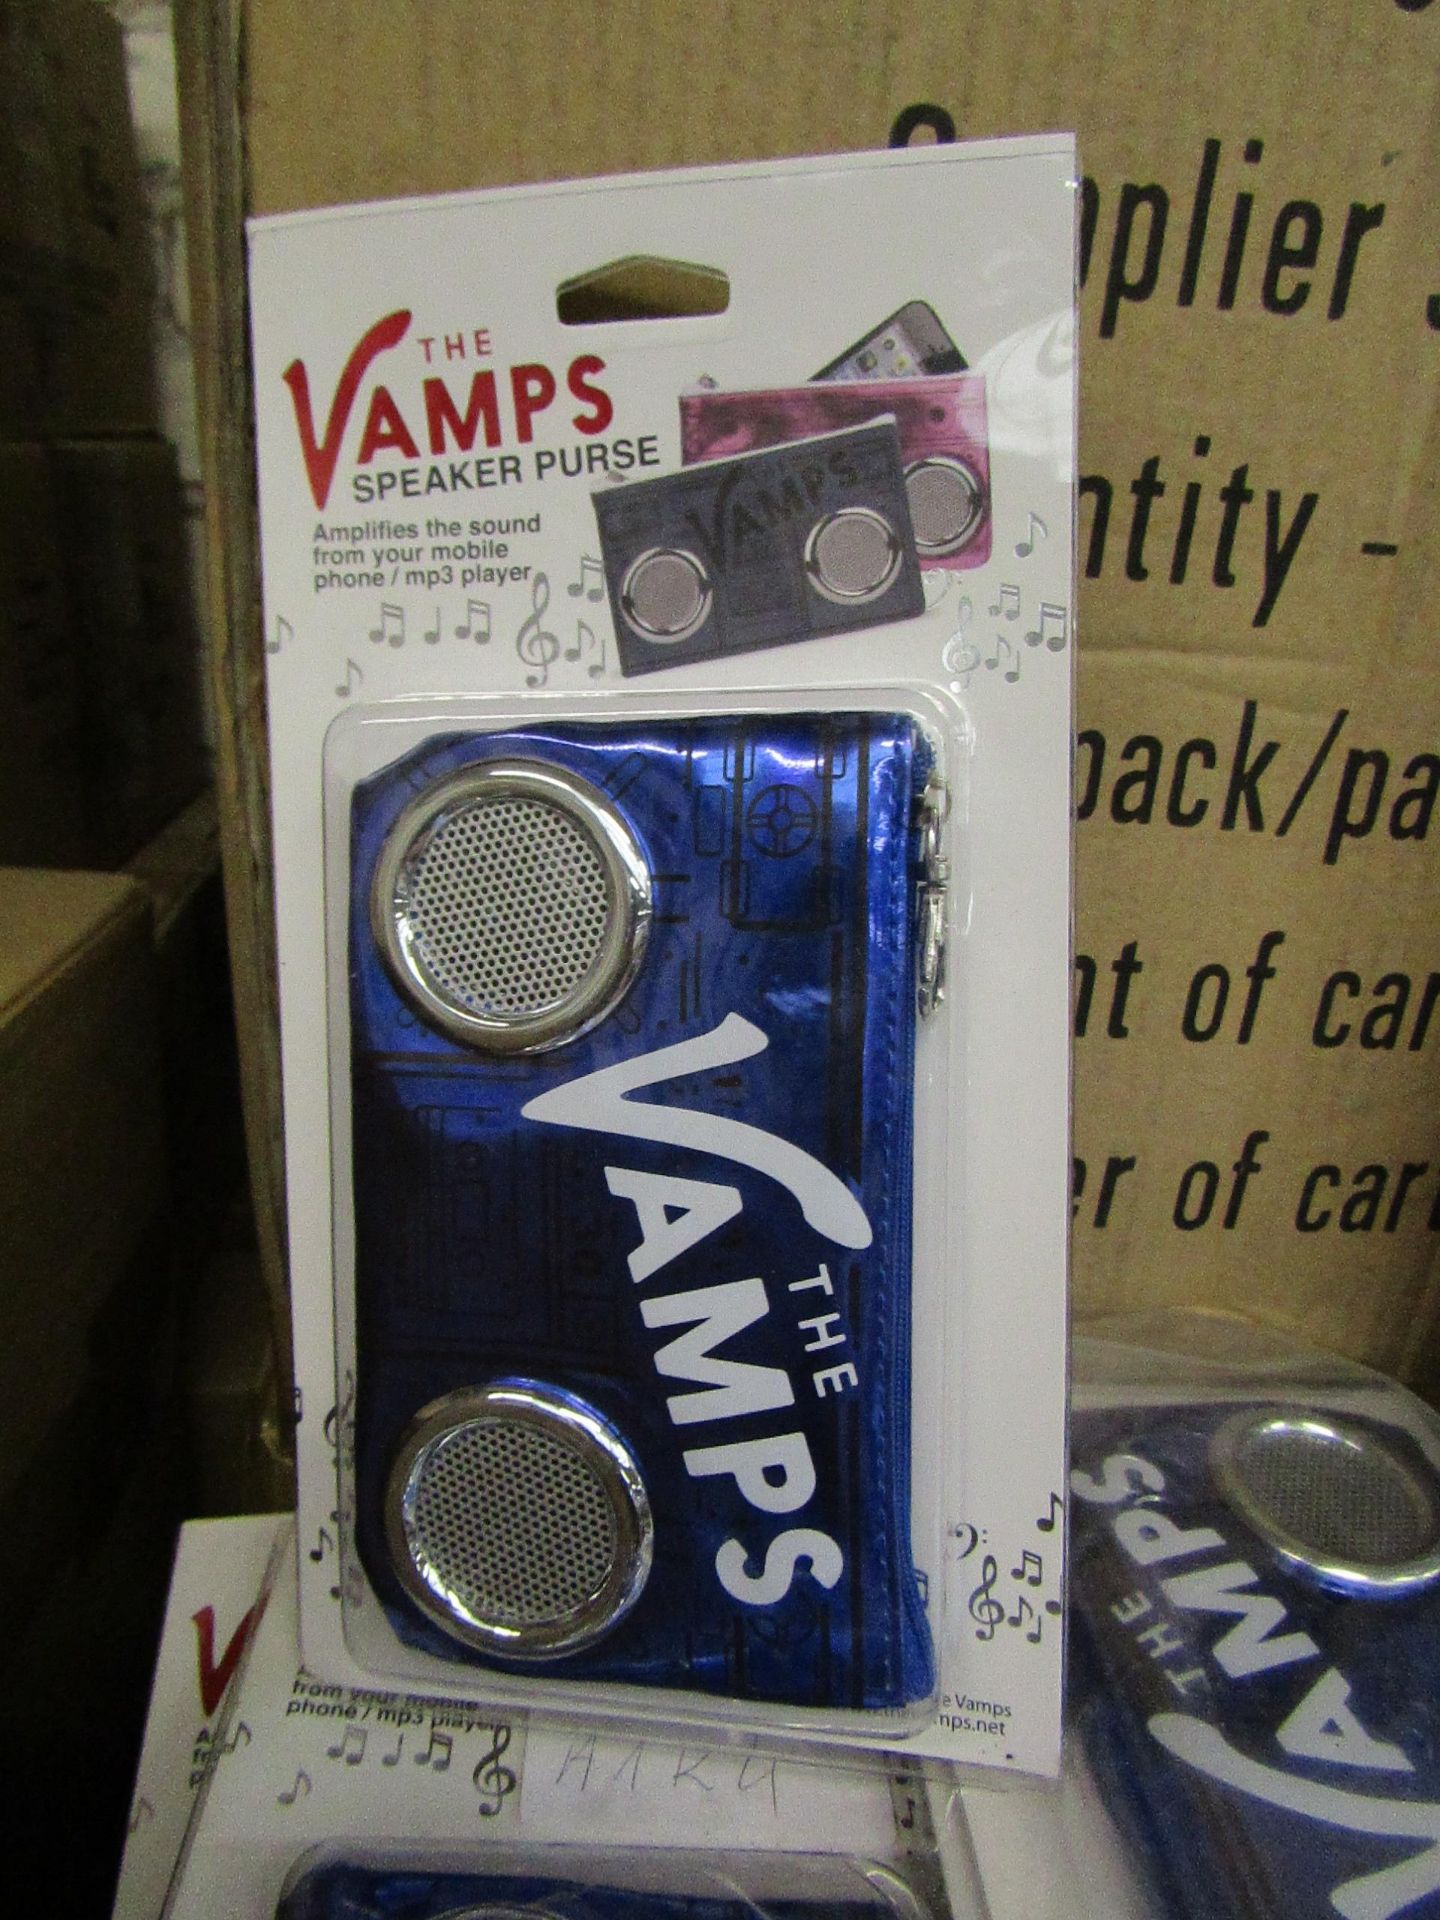 5x The Vamps - Speaker Purses, Amplifies the sound from Your phone - Unused & Packaged.